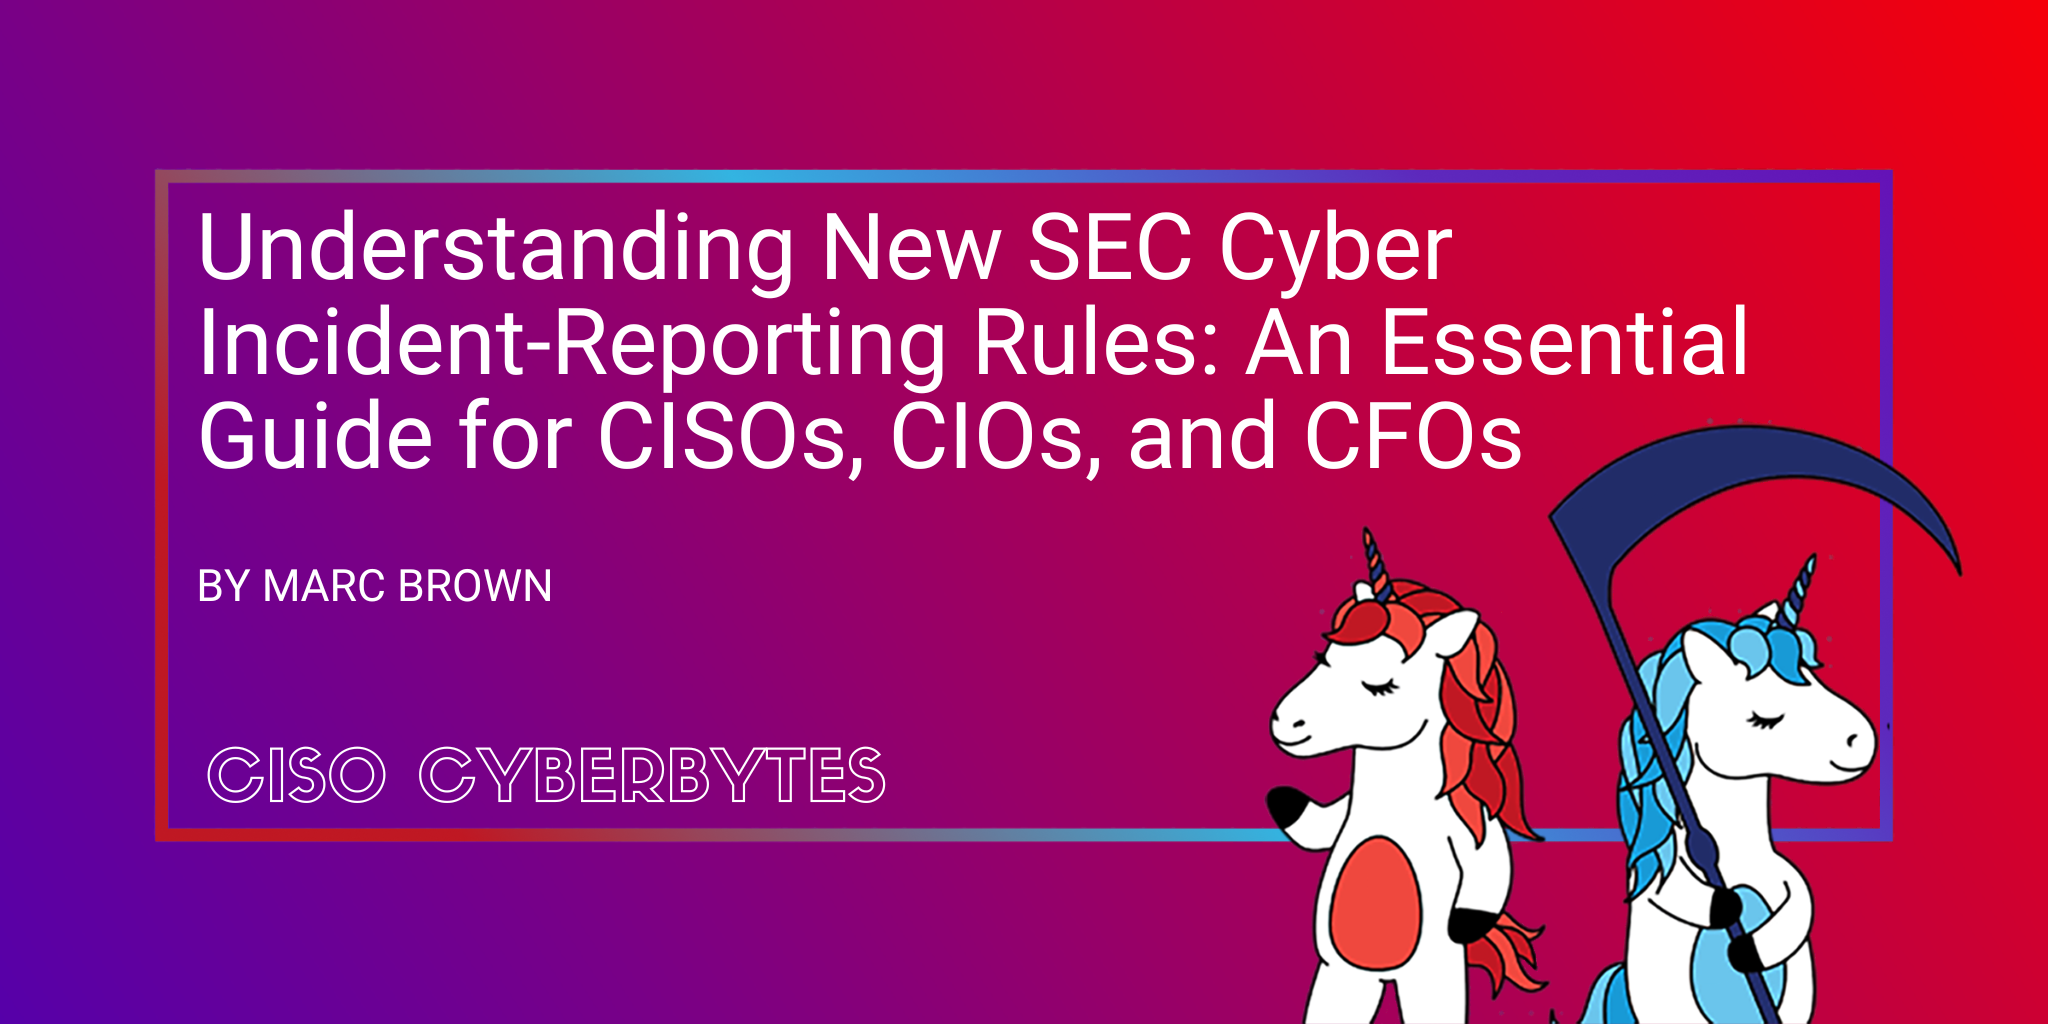 Understanding New SEC Cyber Incident-Reporting Rules: An Essential Guide for CISOs, CIOs, and CFOs